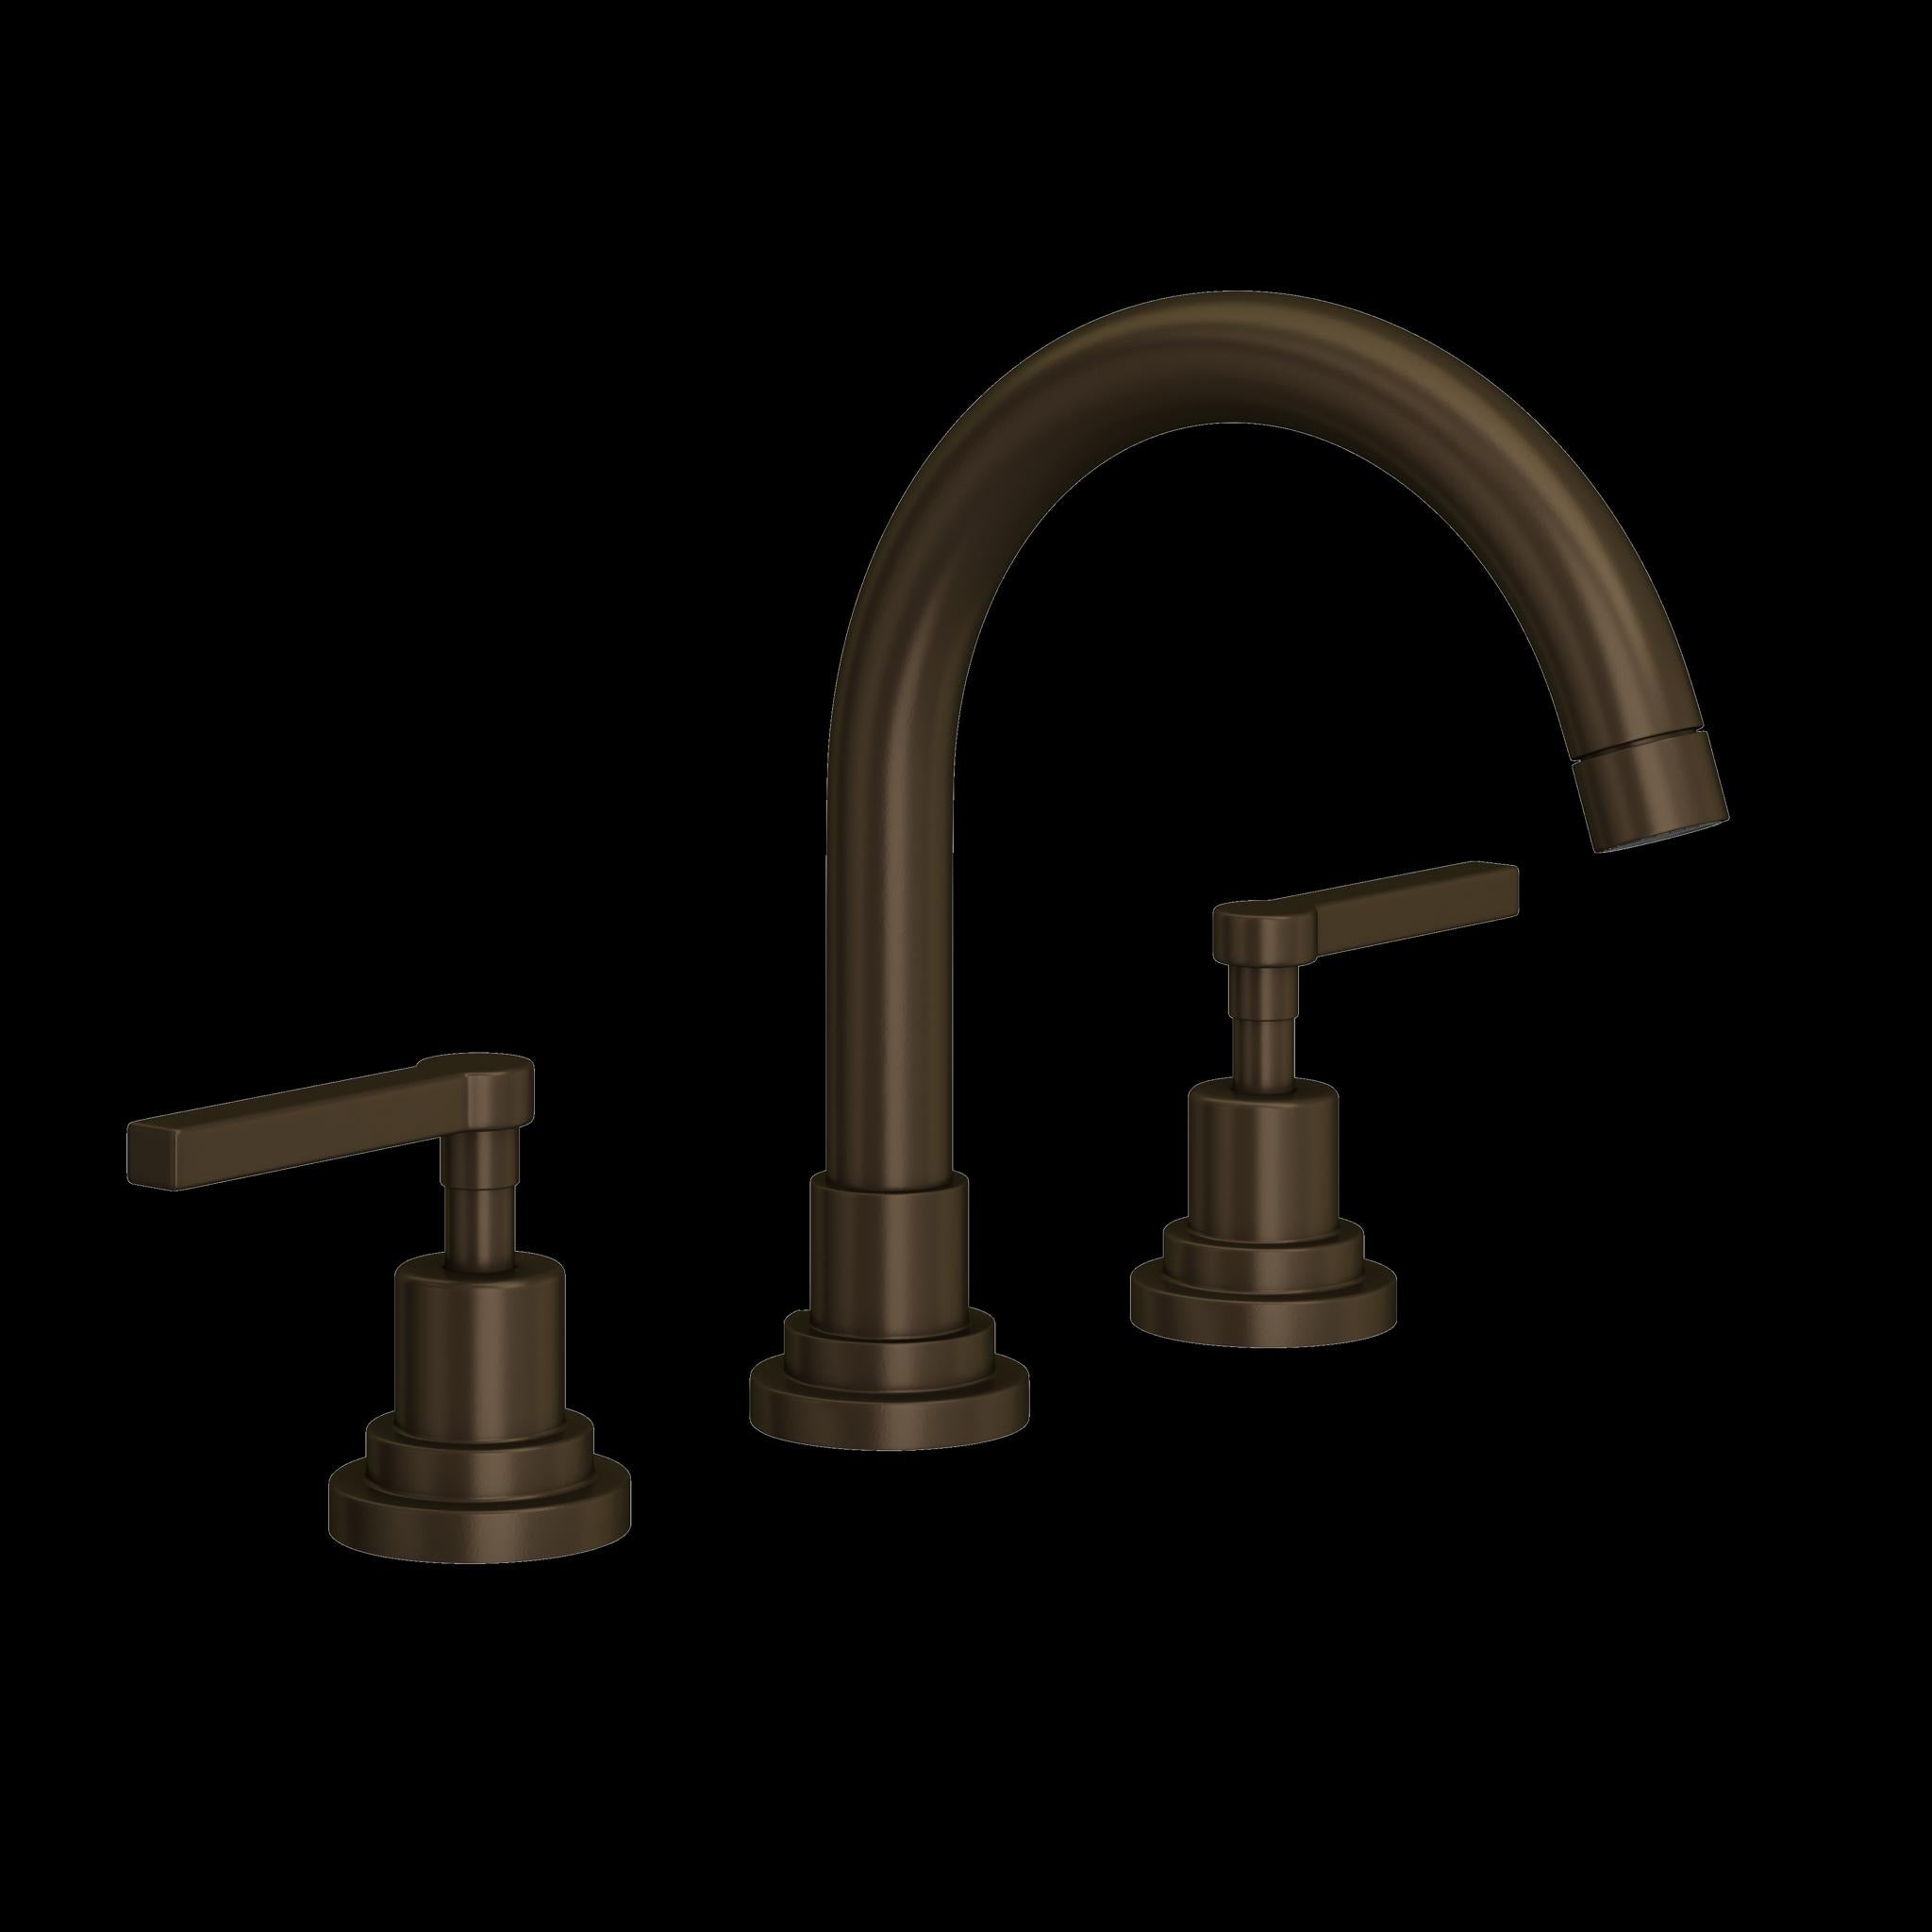 ROHL A2228 Lombardia Widespread Lavatory Faucet With C-Spout